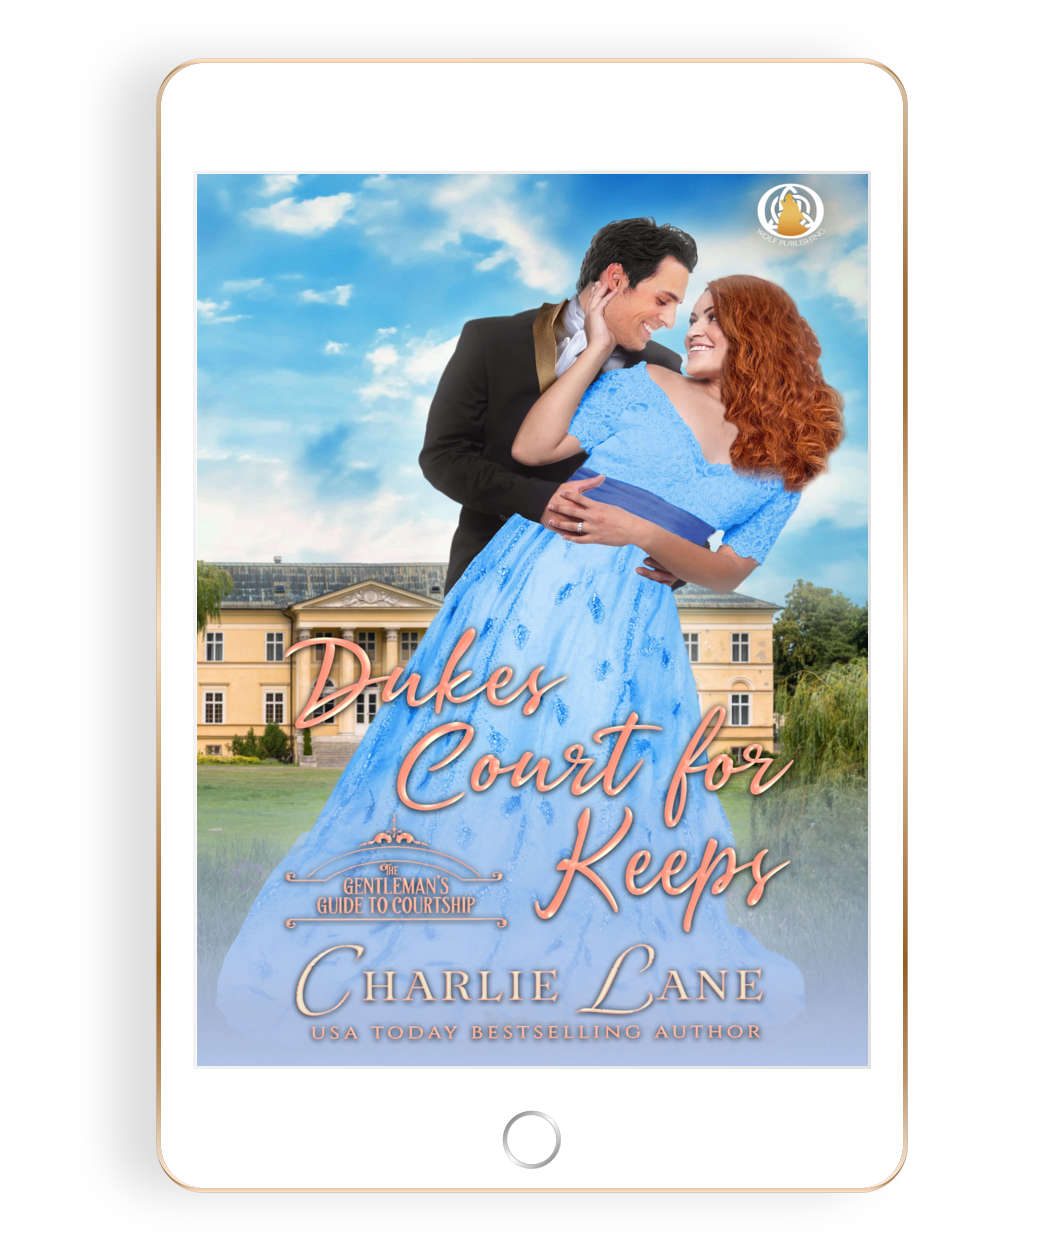 Dukes Court for Keeps (Book 6)